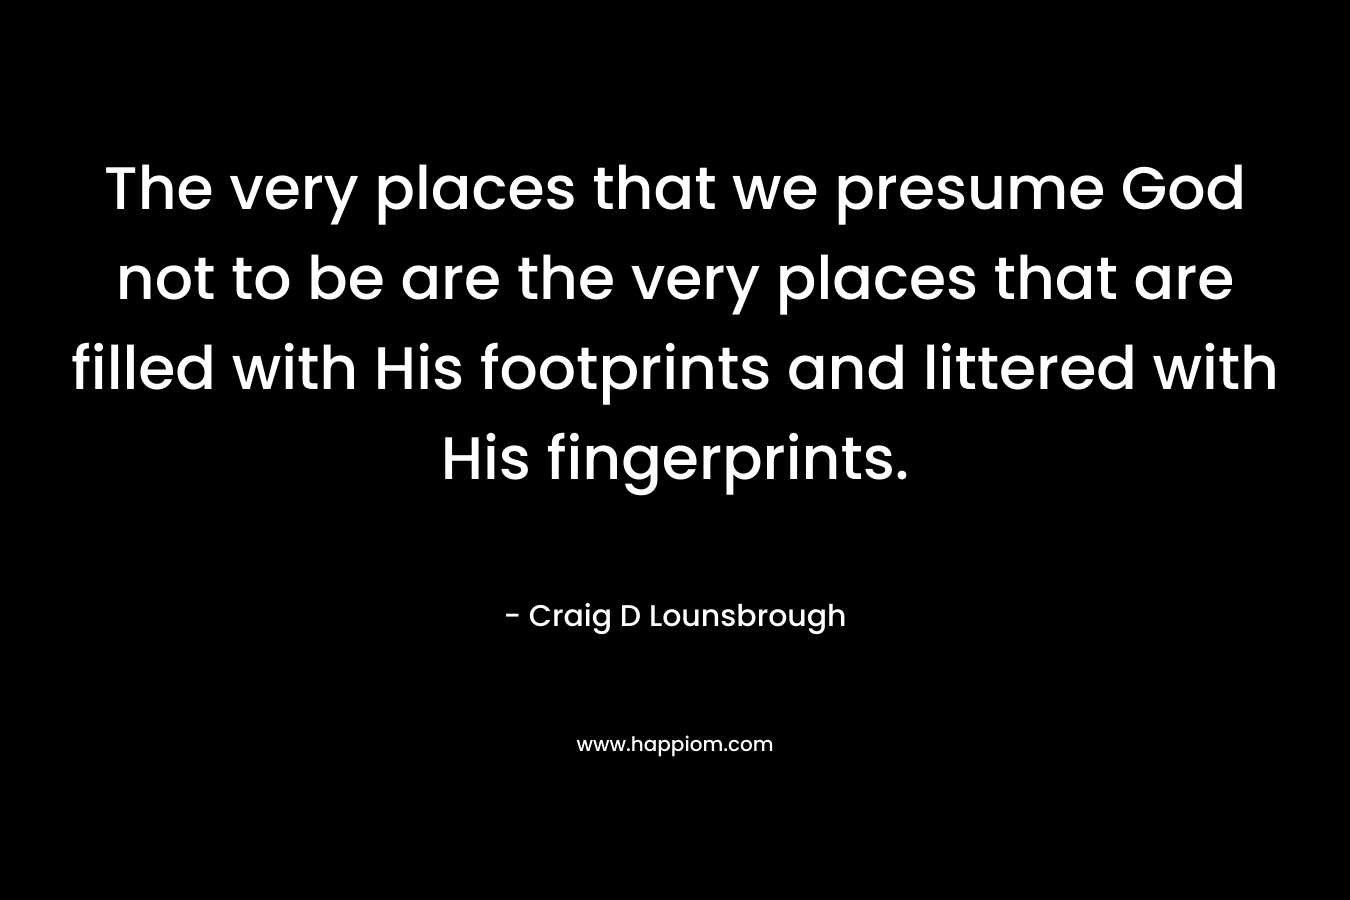 The very places that we presume God not to be are the very places that are filled with His footprints and littered with His fingerprints.